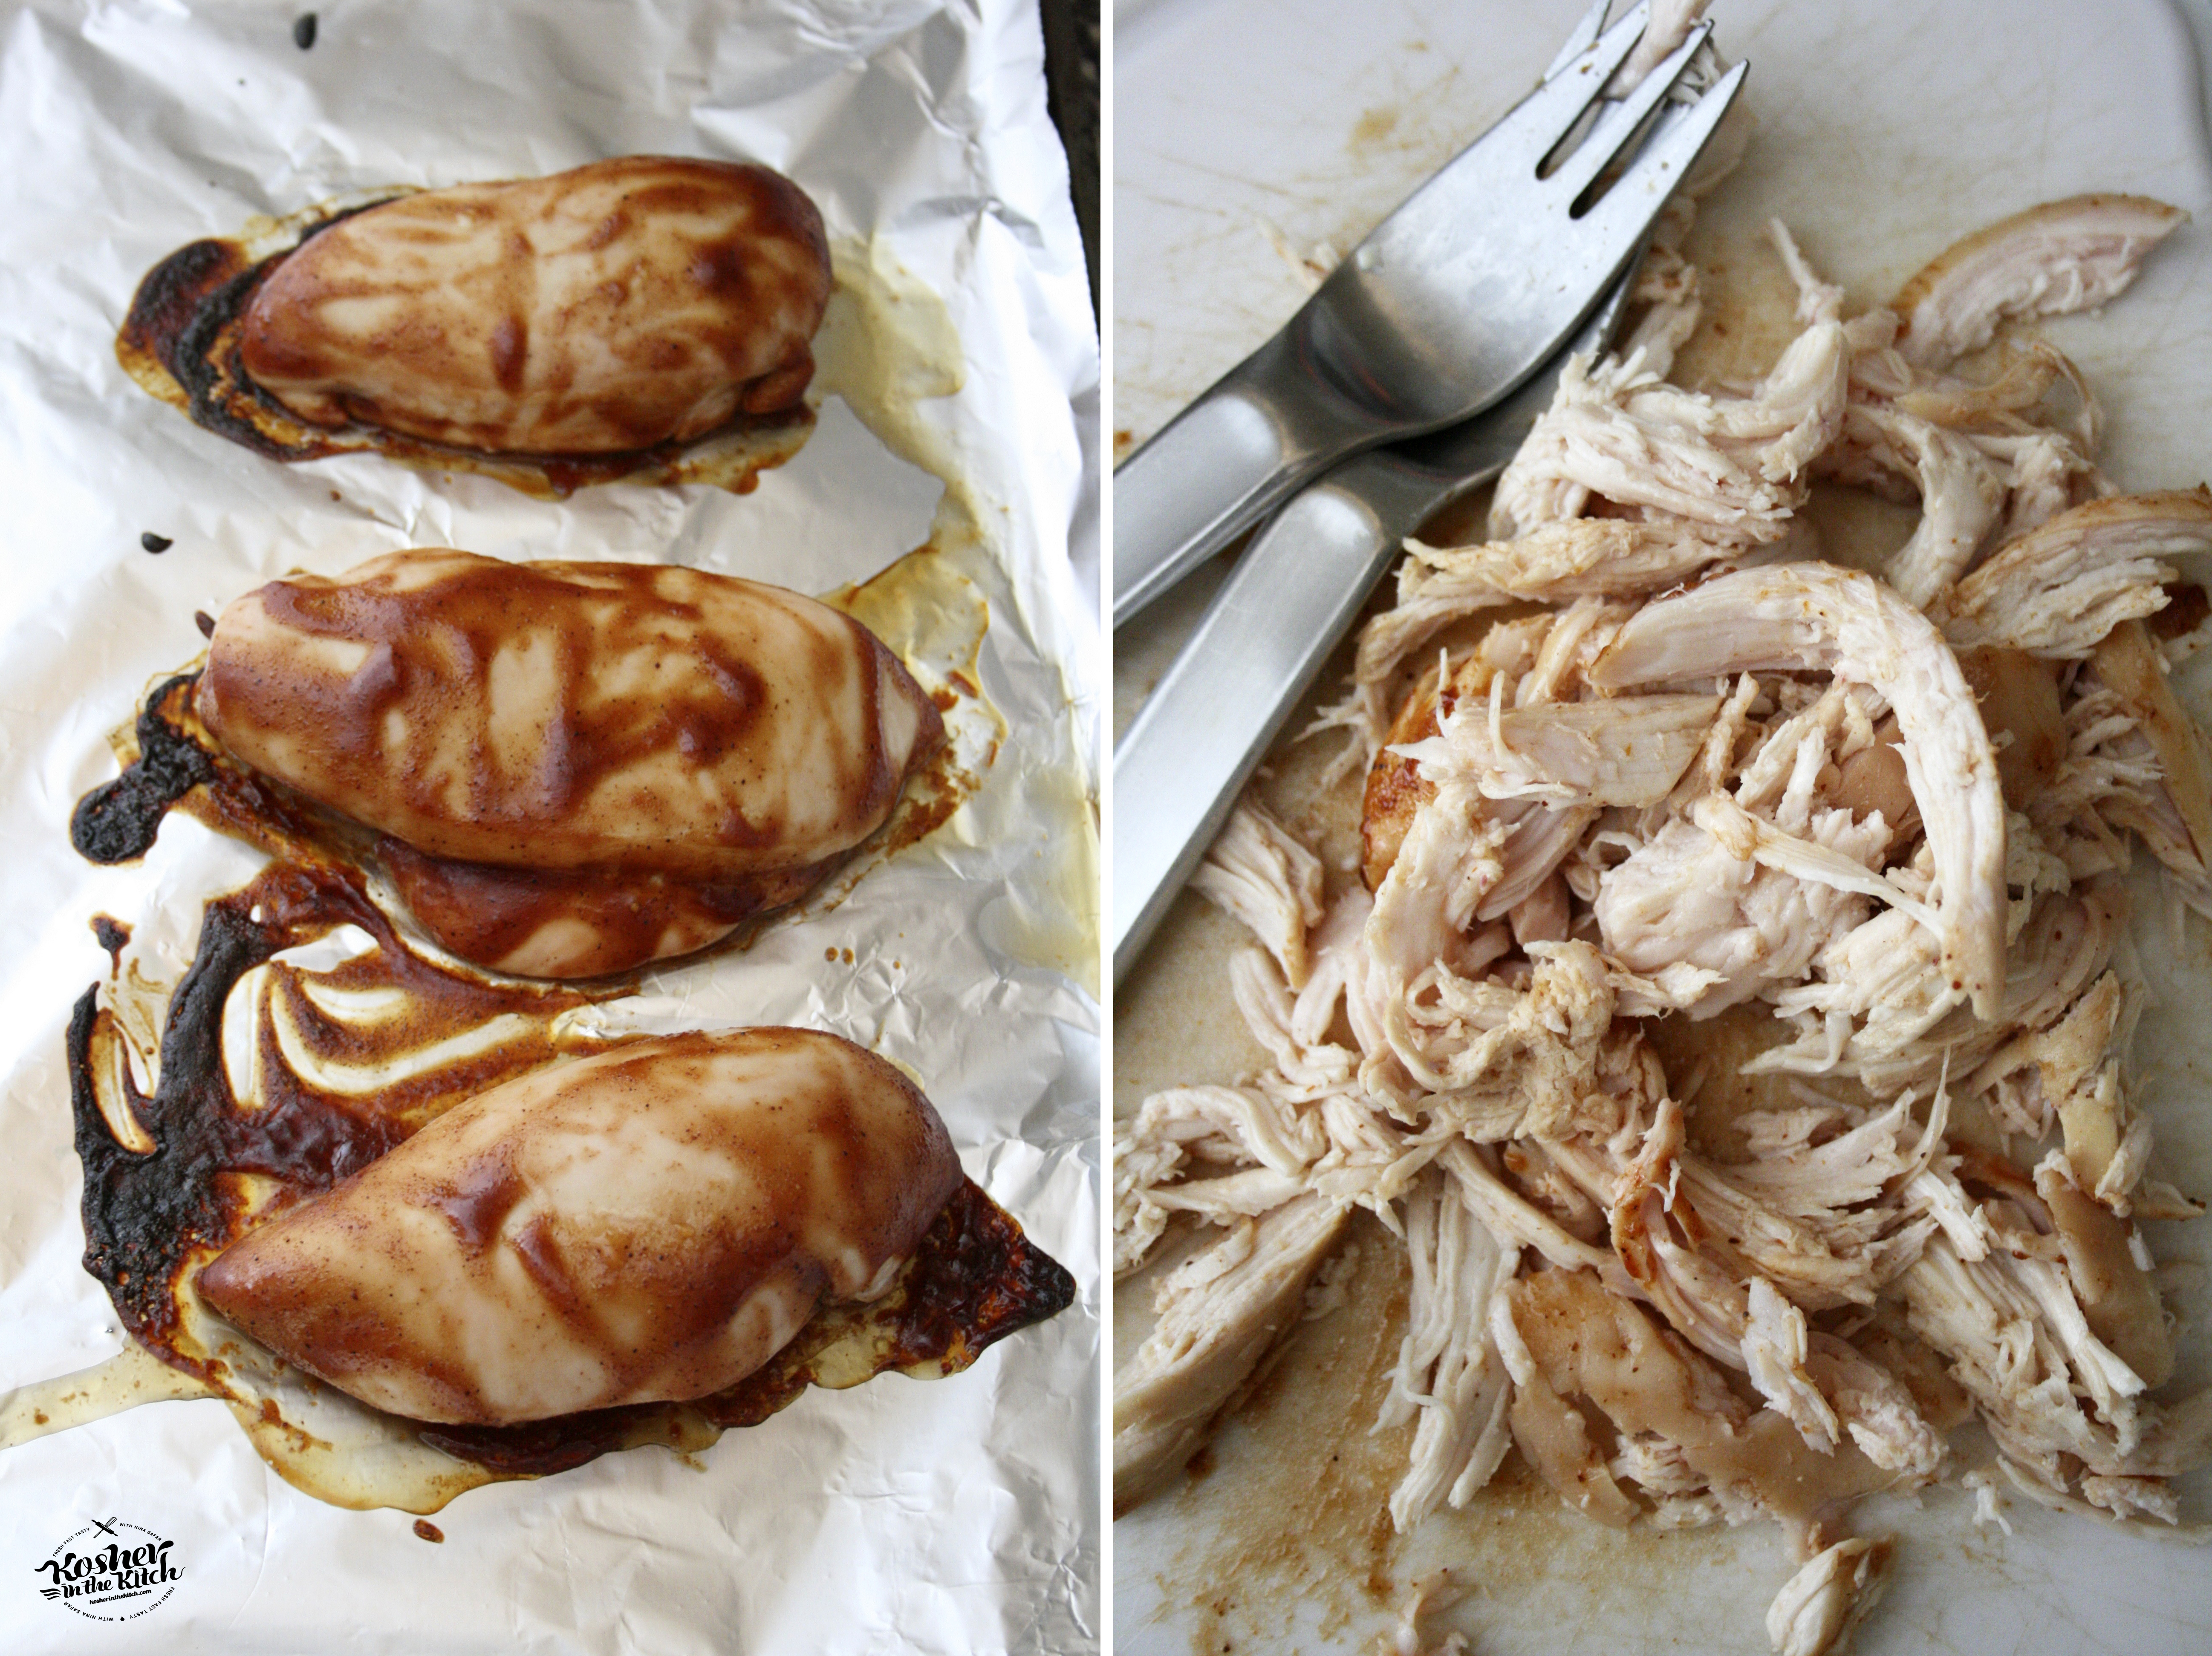 Shred BBQ chicken using two forks